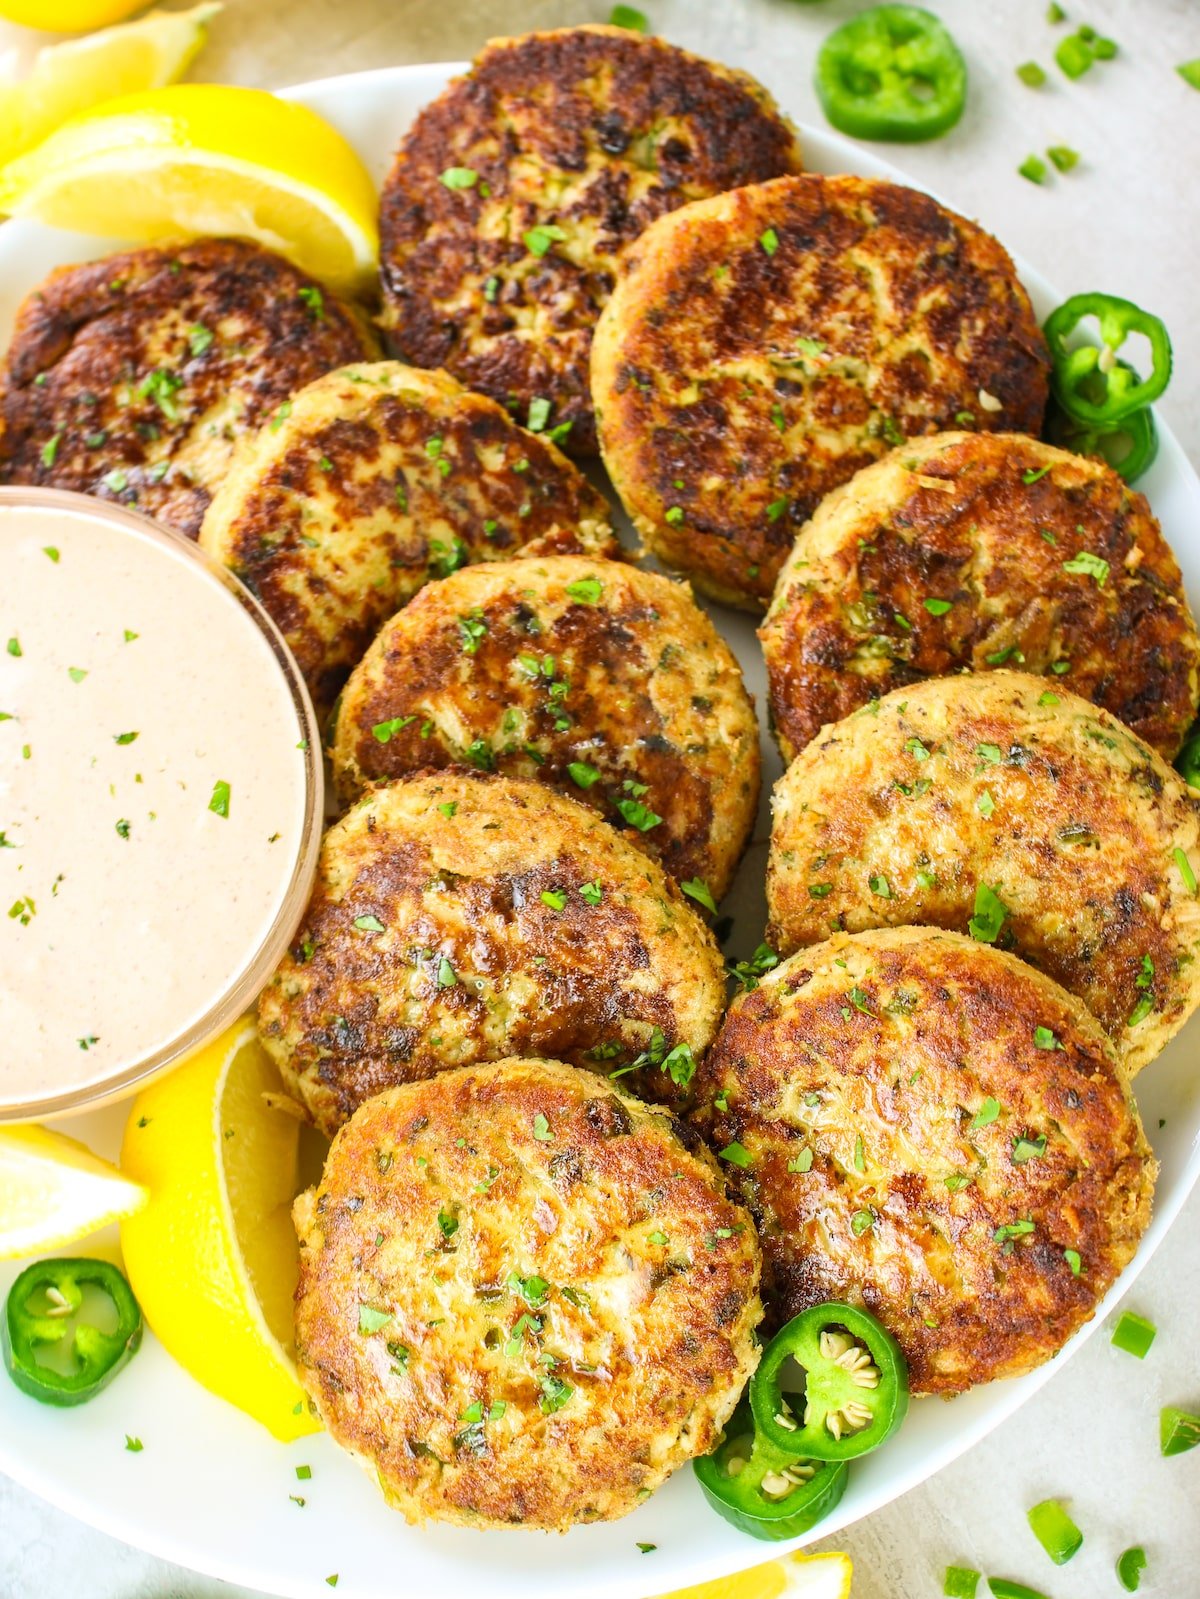 10 tuna cakes arranged on a plate with Sriracha aioli sauce in a bowl next to them.